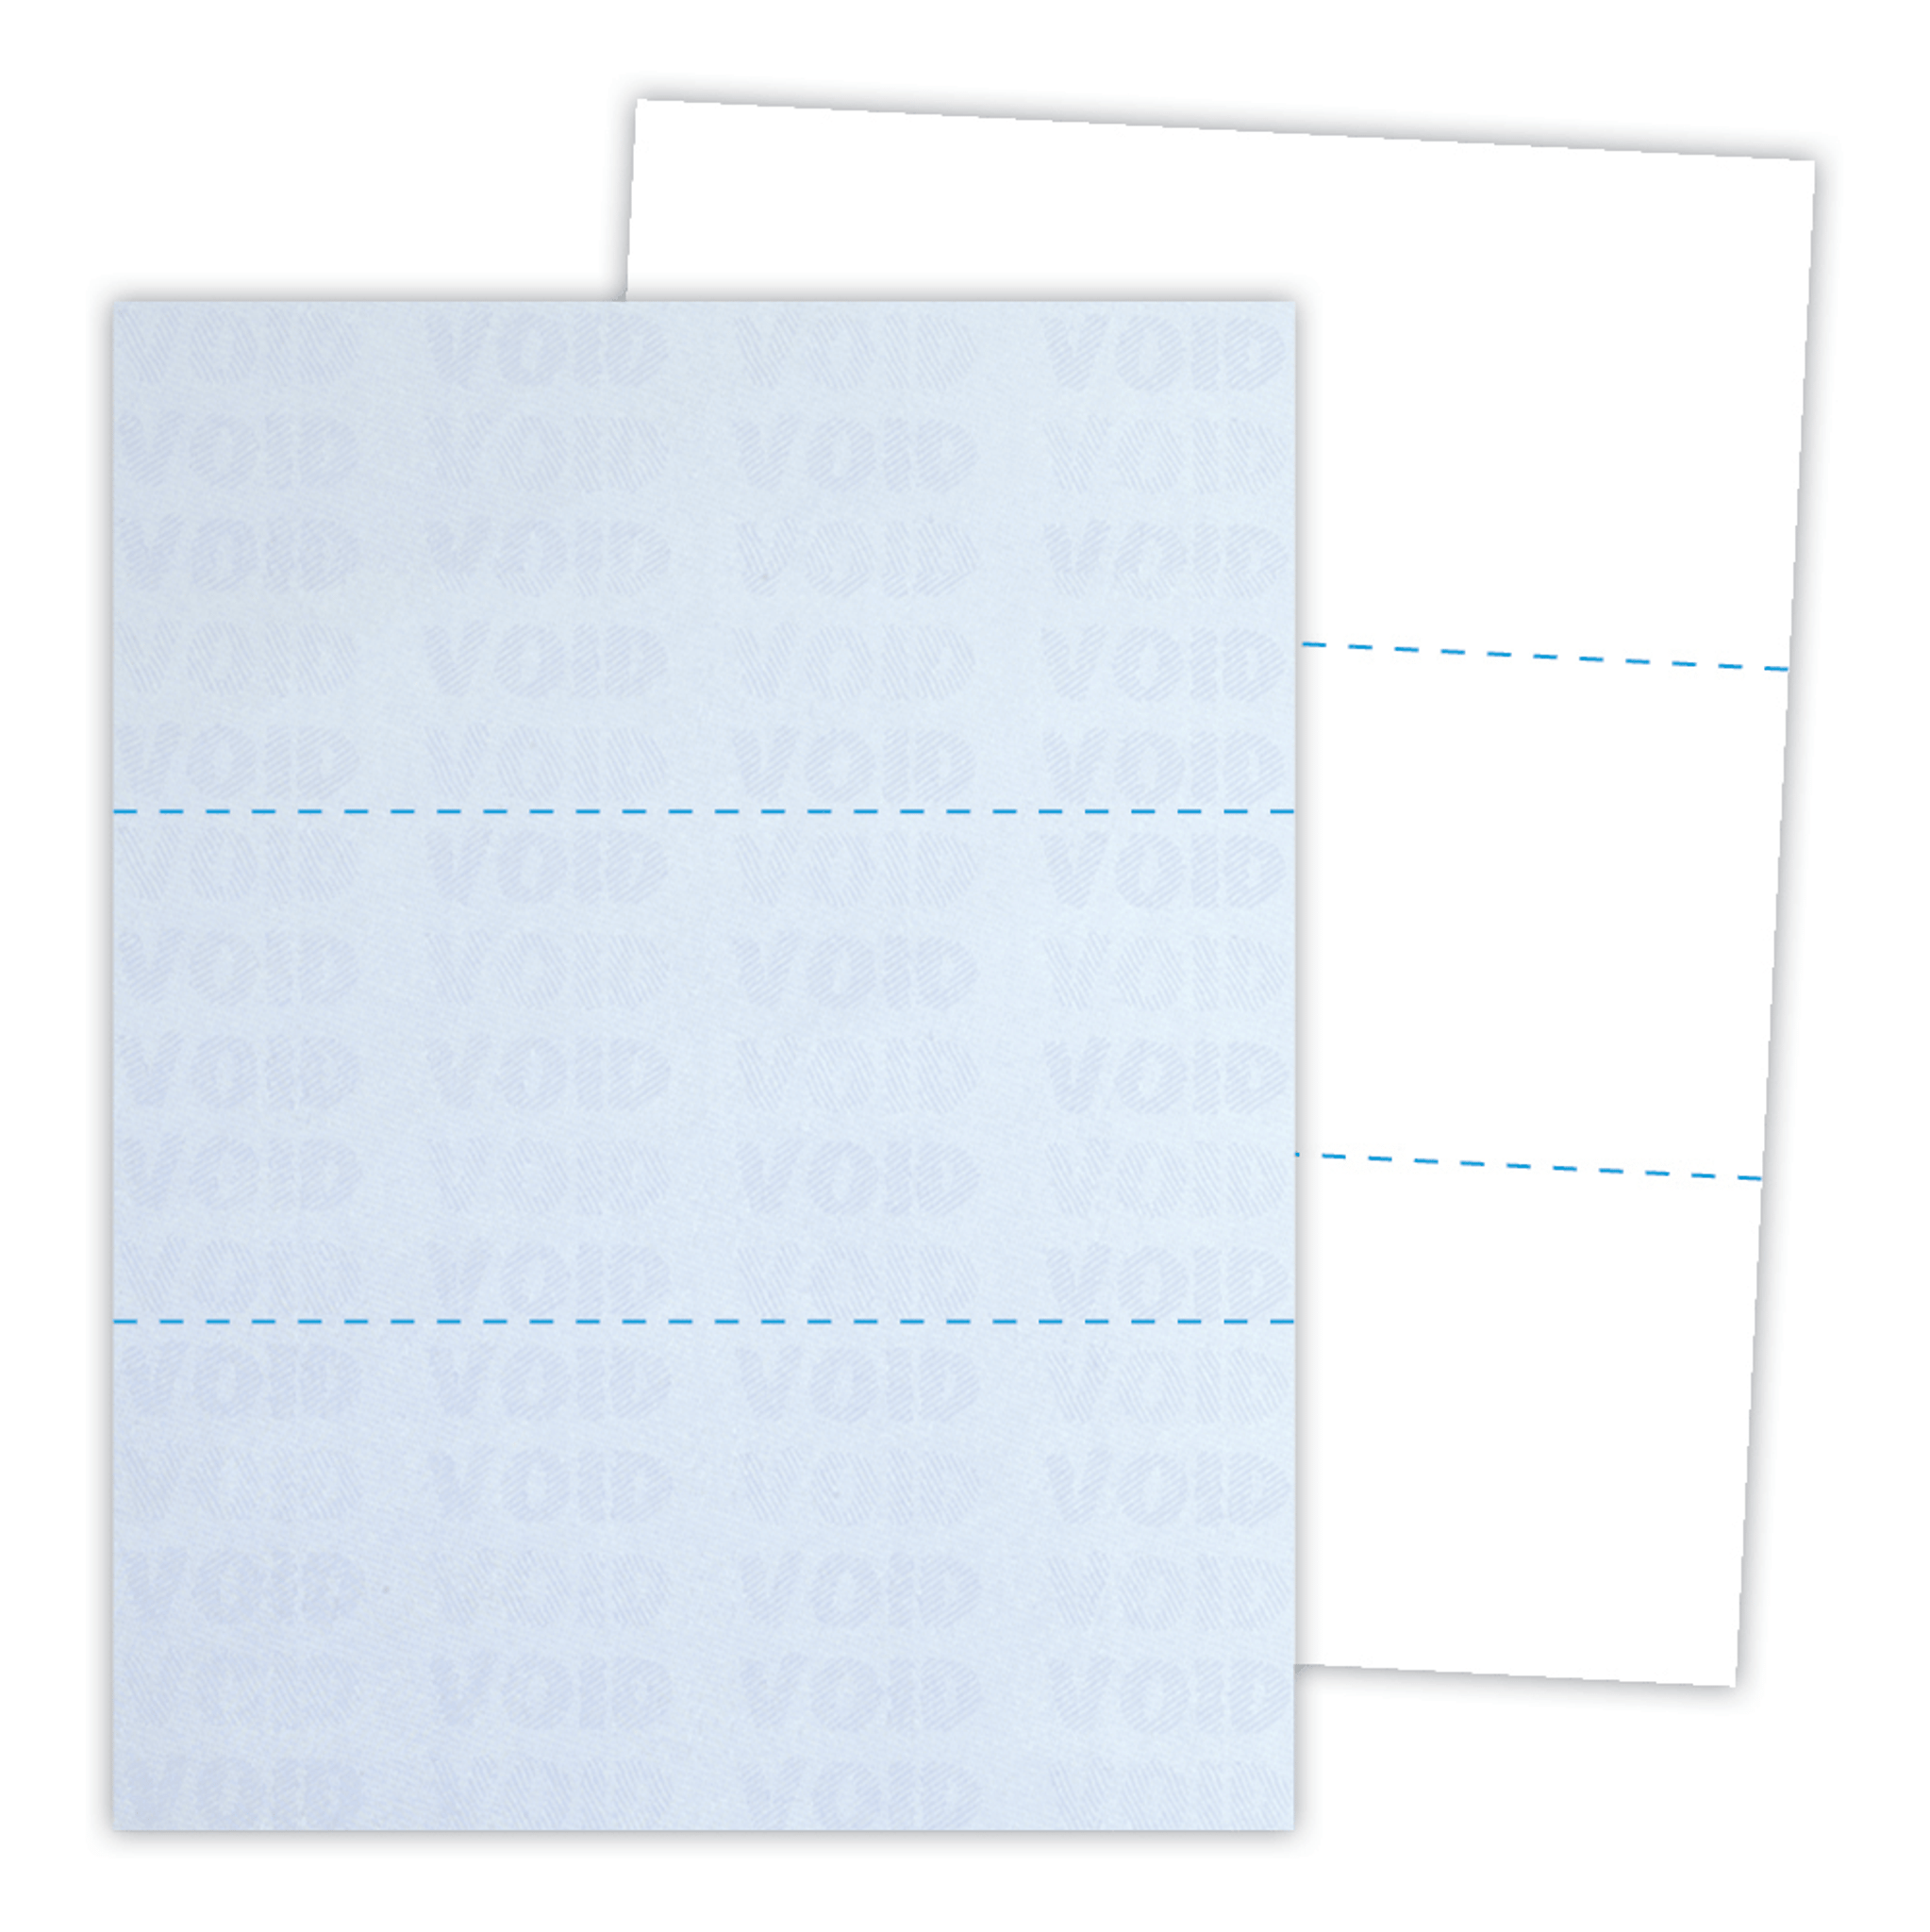 How to Perforate Paper at Home-Check Our Different Solution